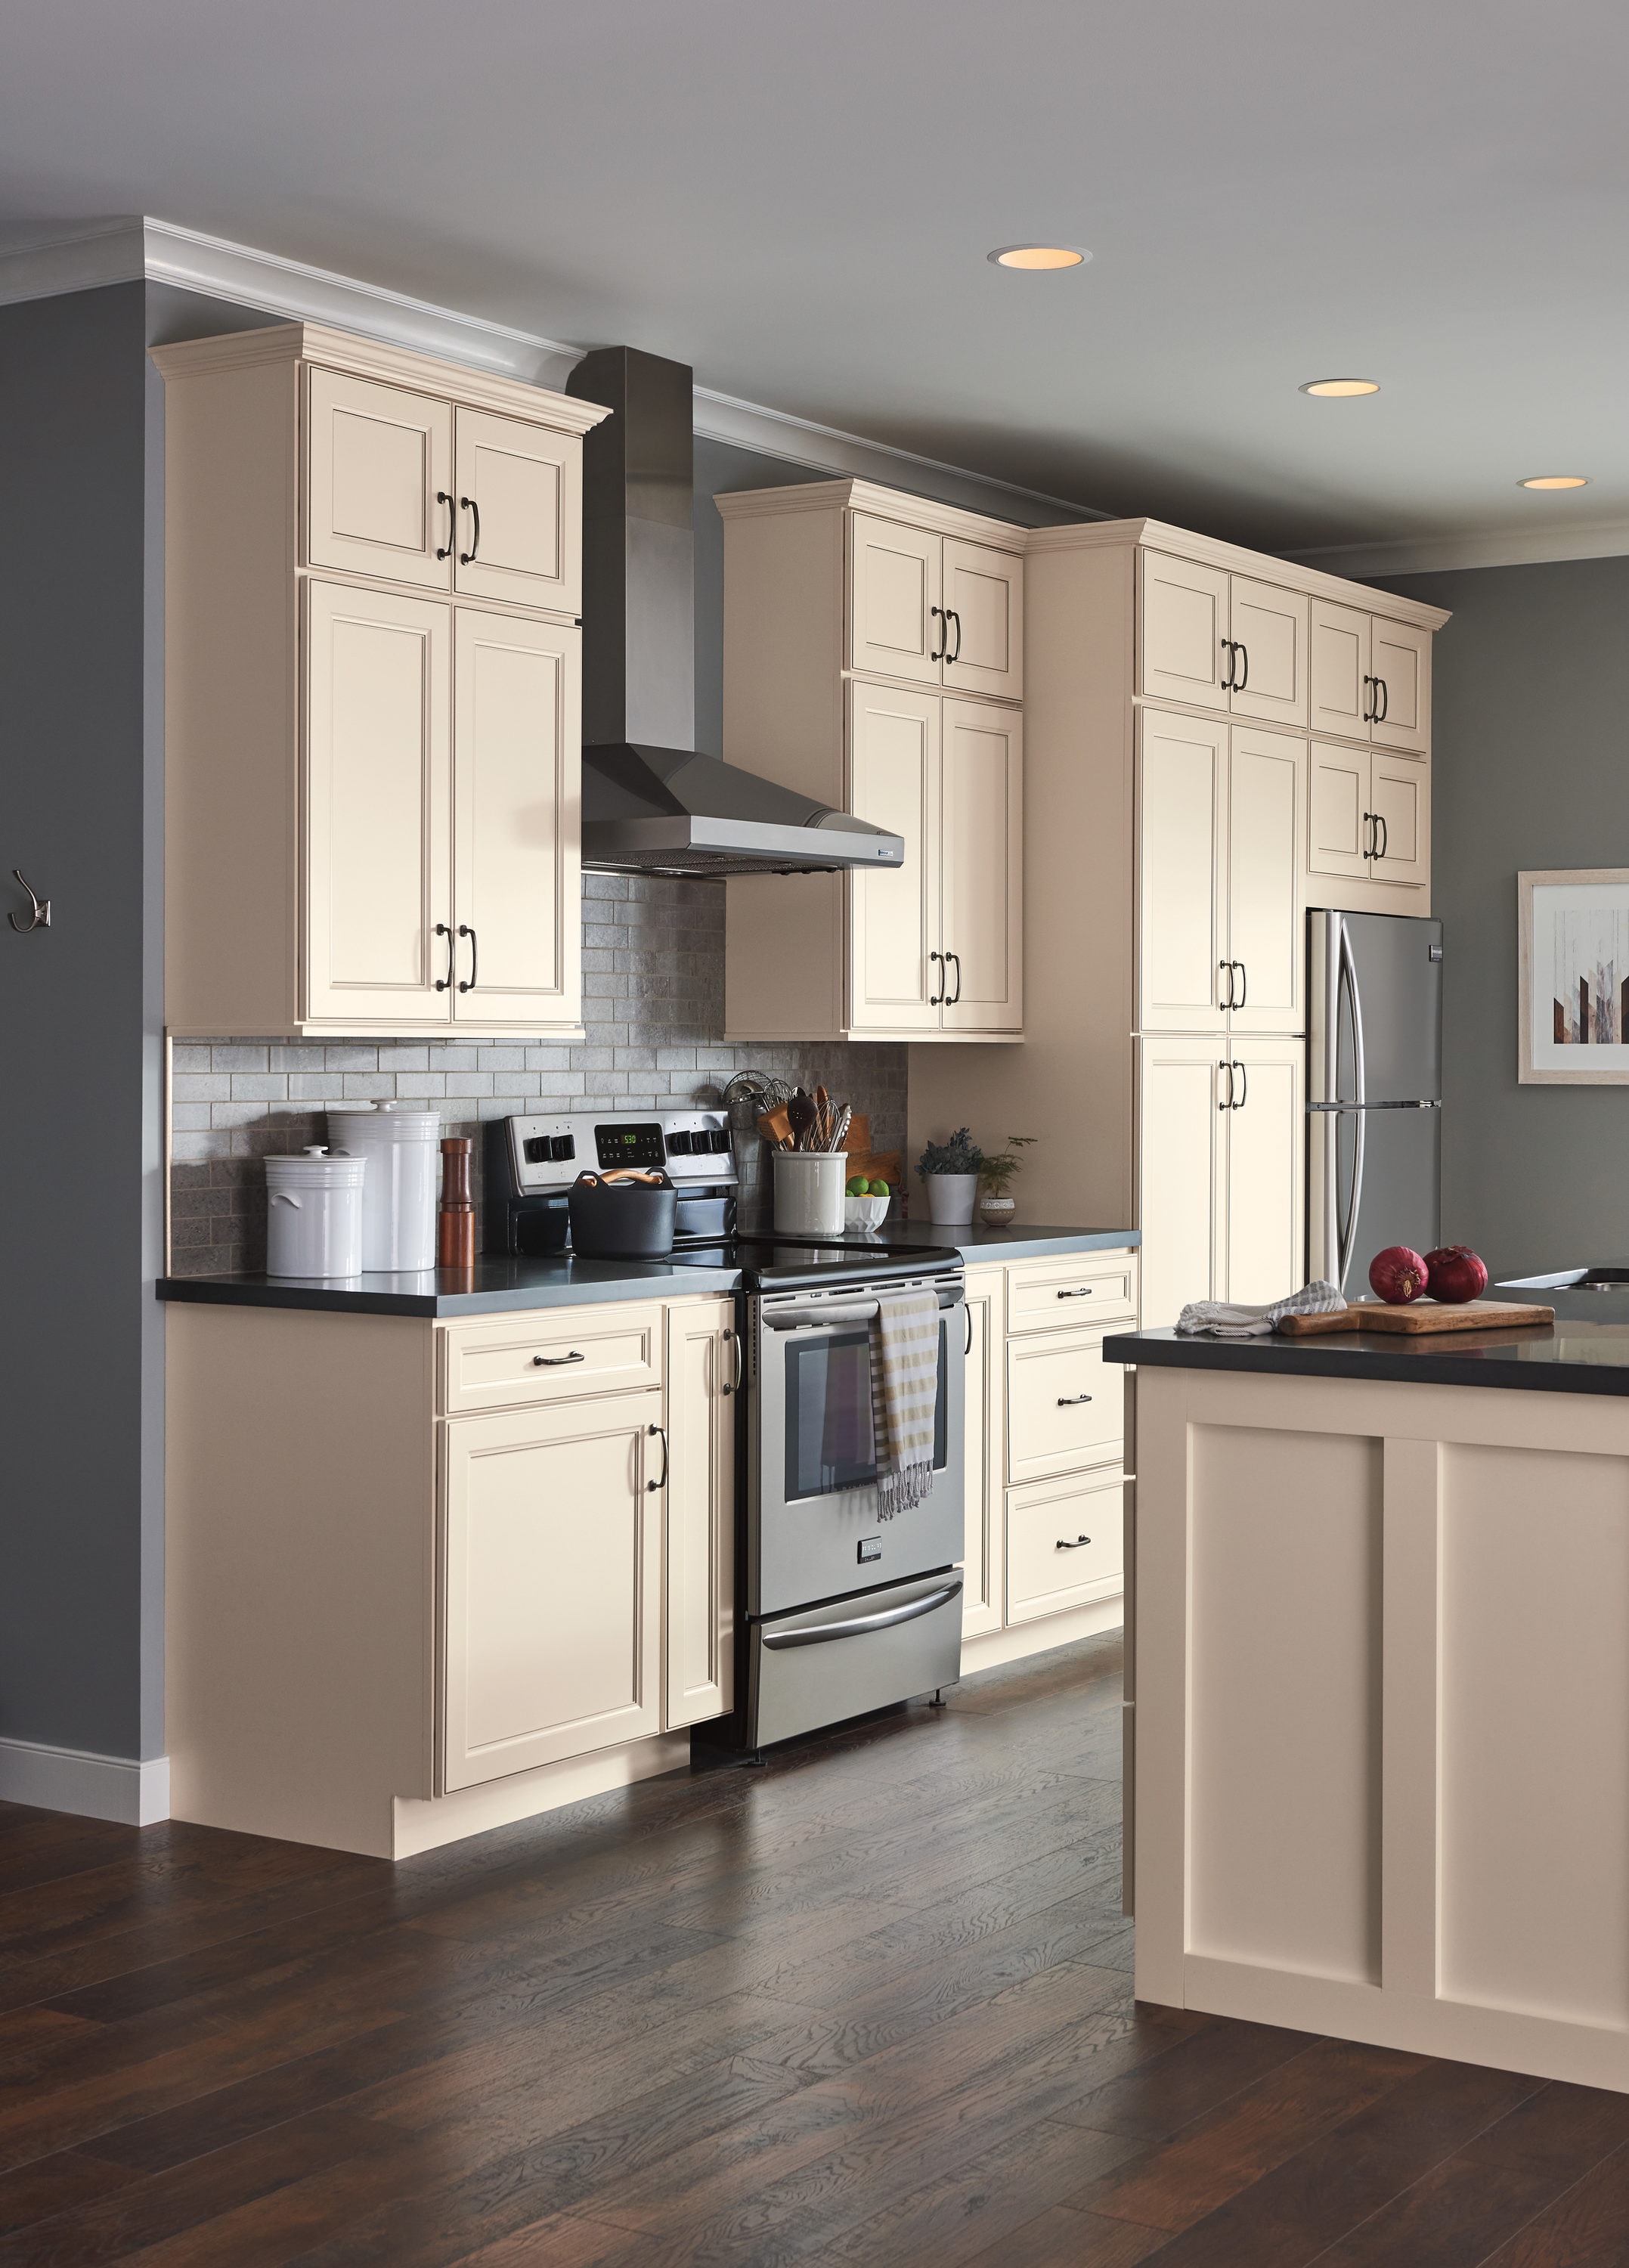 Diamond at Lowes - Appliance Cabinets - Wall Microwave Cabinet